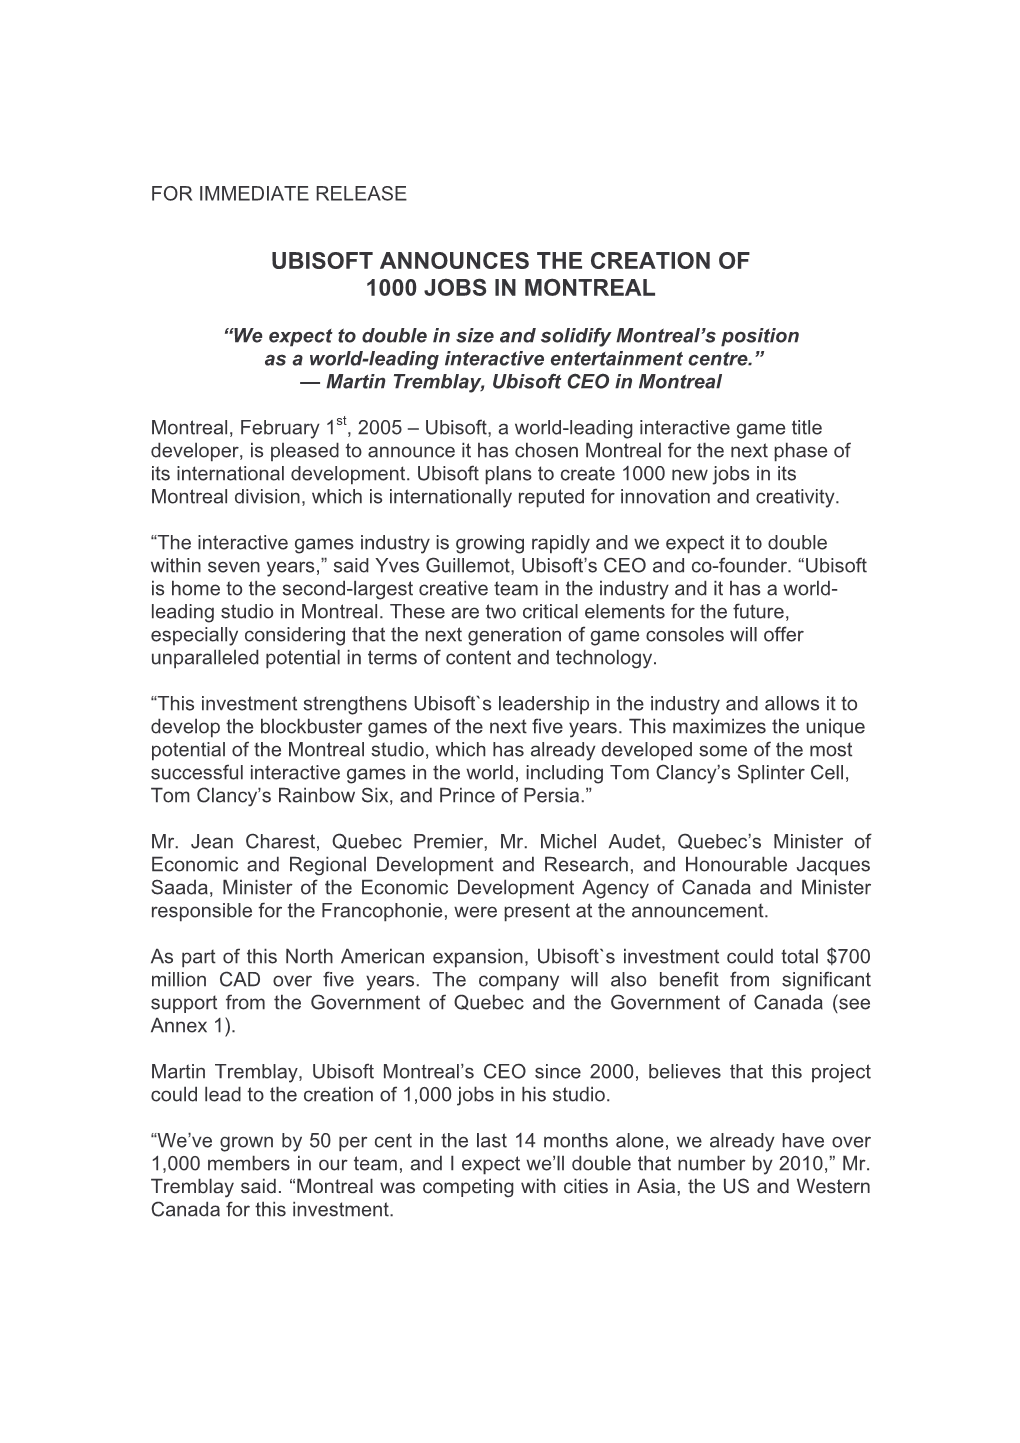 Ubisoft Announces the Creation of 1000 Jobs in Montreal